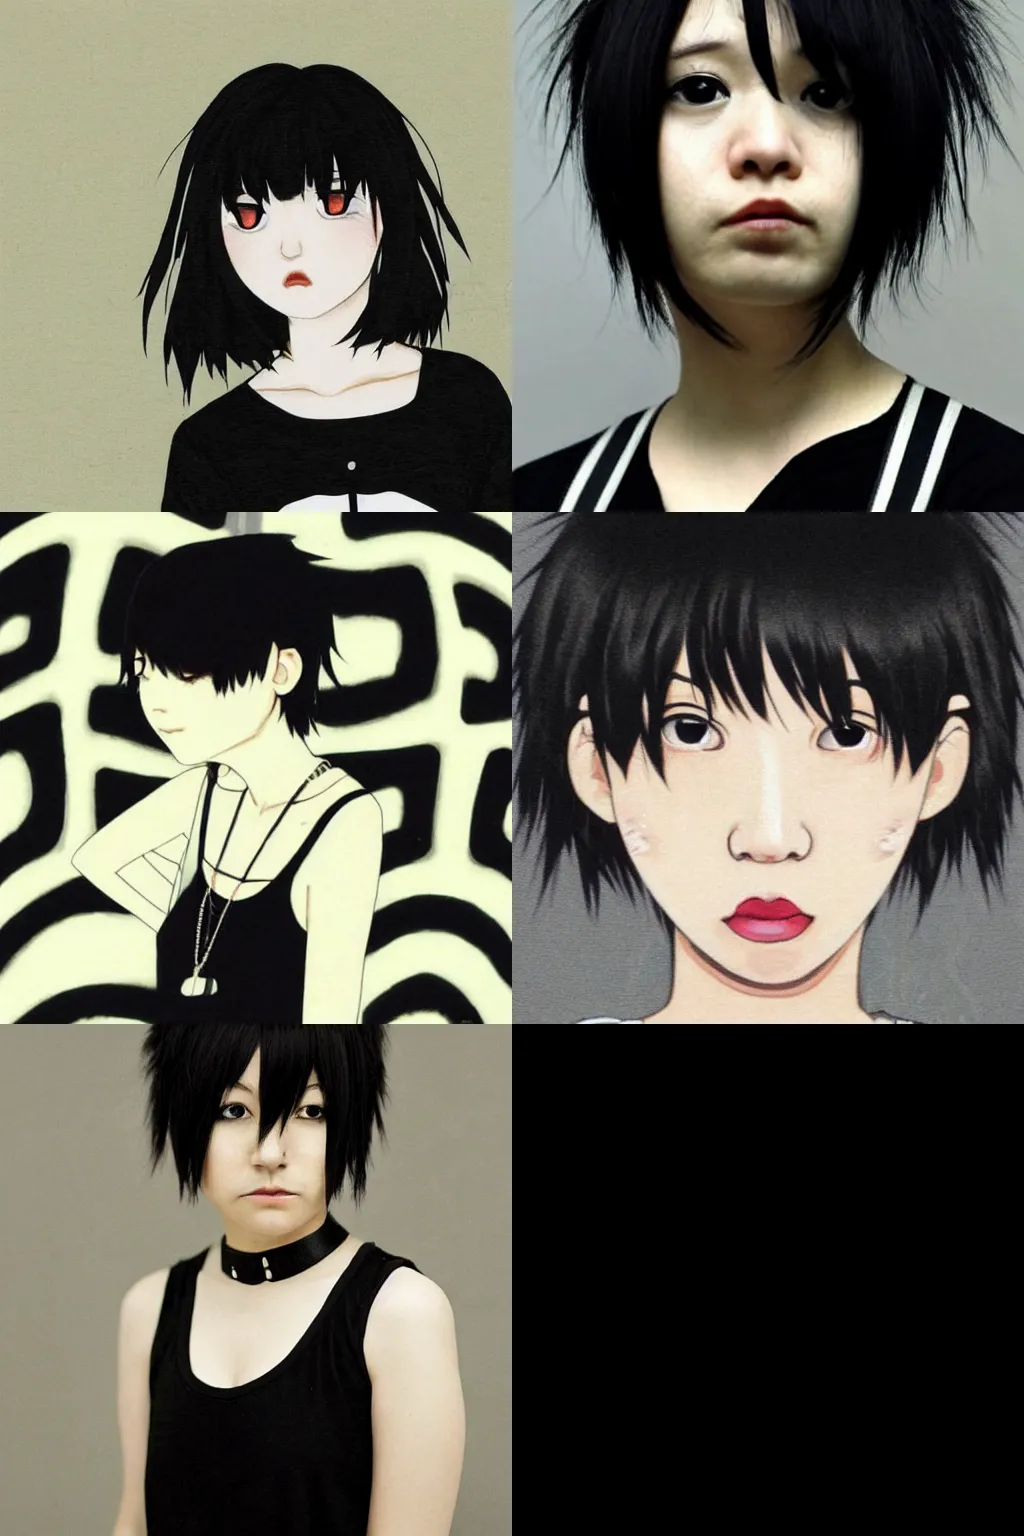 Prompt: an emo portrait by chiho aoshima. her hair is dark brown and cut into a short, messy pixie cut. she has a slightly rounded face, with a pointed chin, large entirely - black eyes, and a small nose. she is wearing a black tank top, a black leather jacket, a black knee - length skirt, and a black choker..